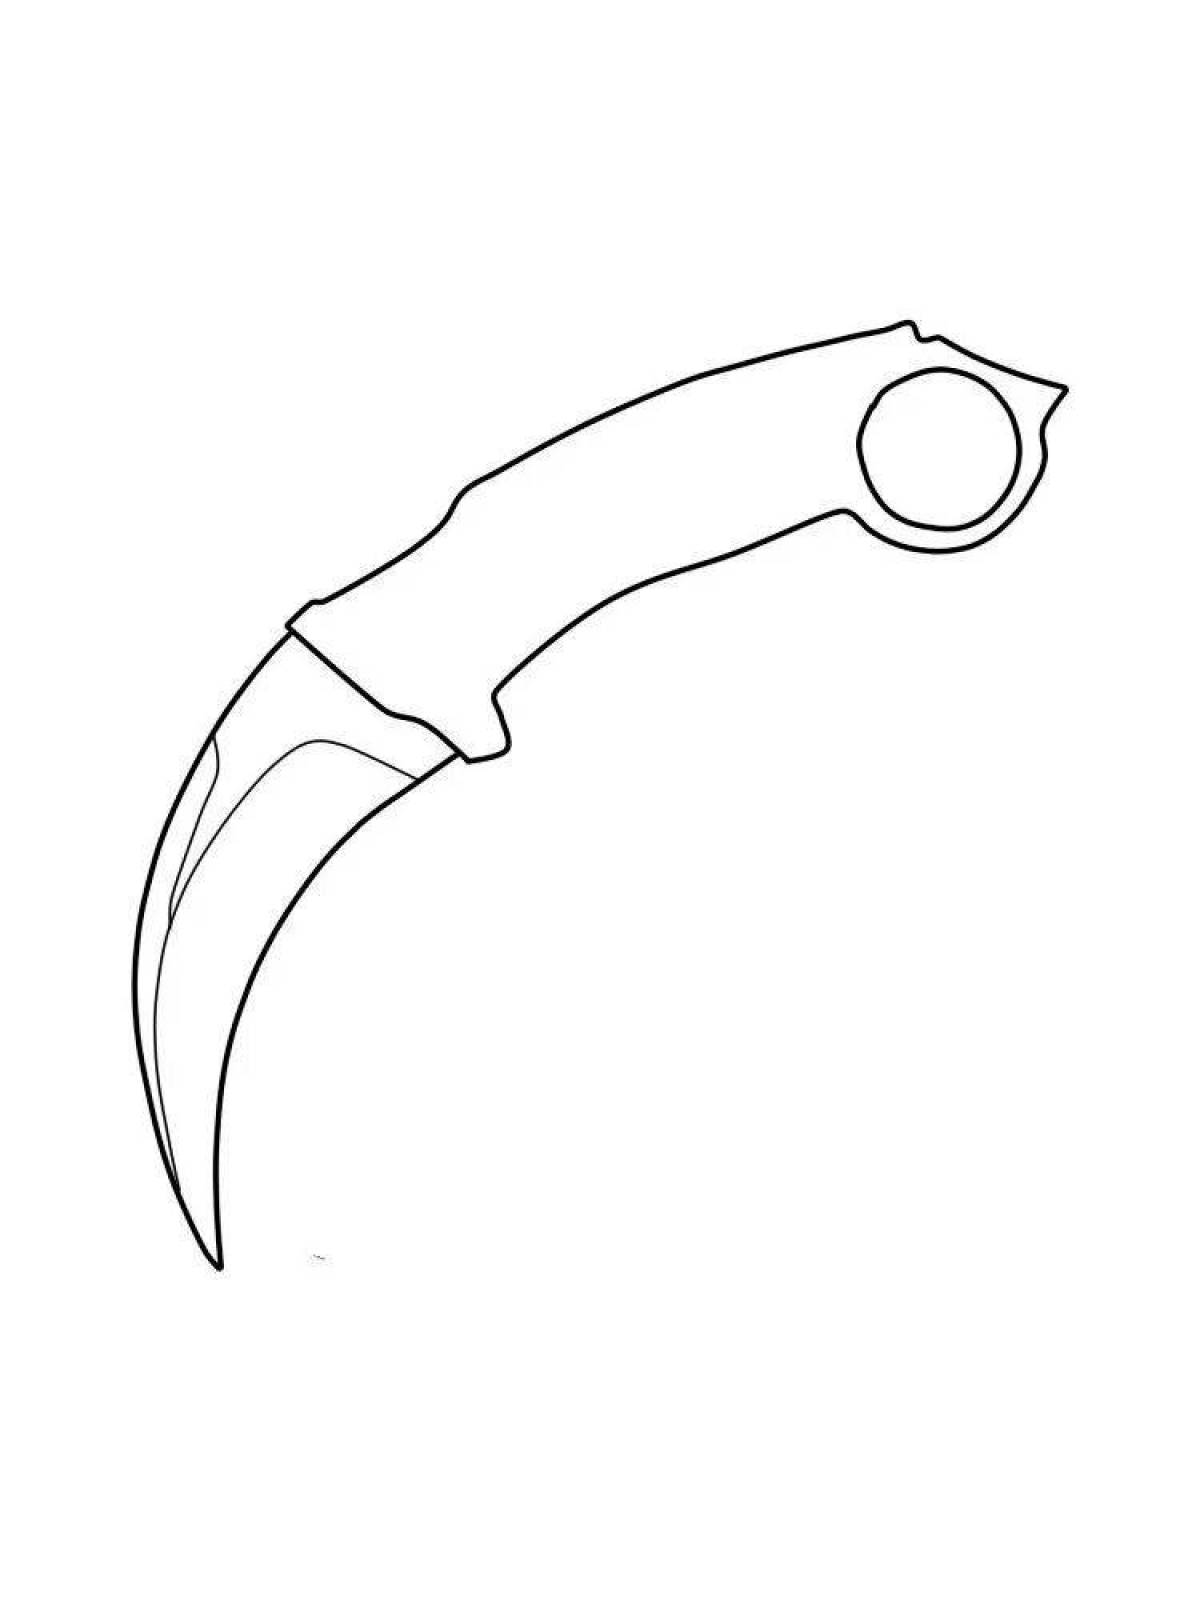 Karambit Knife Coloring Page from standoff 2